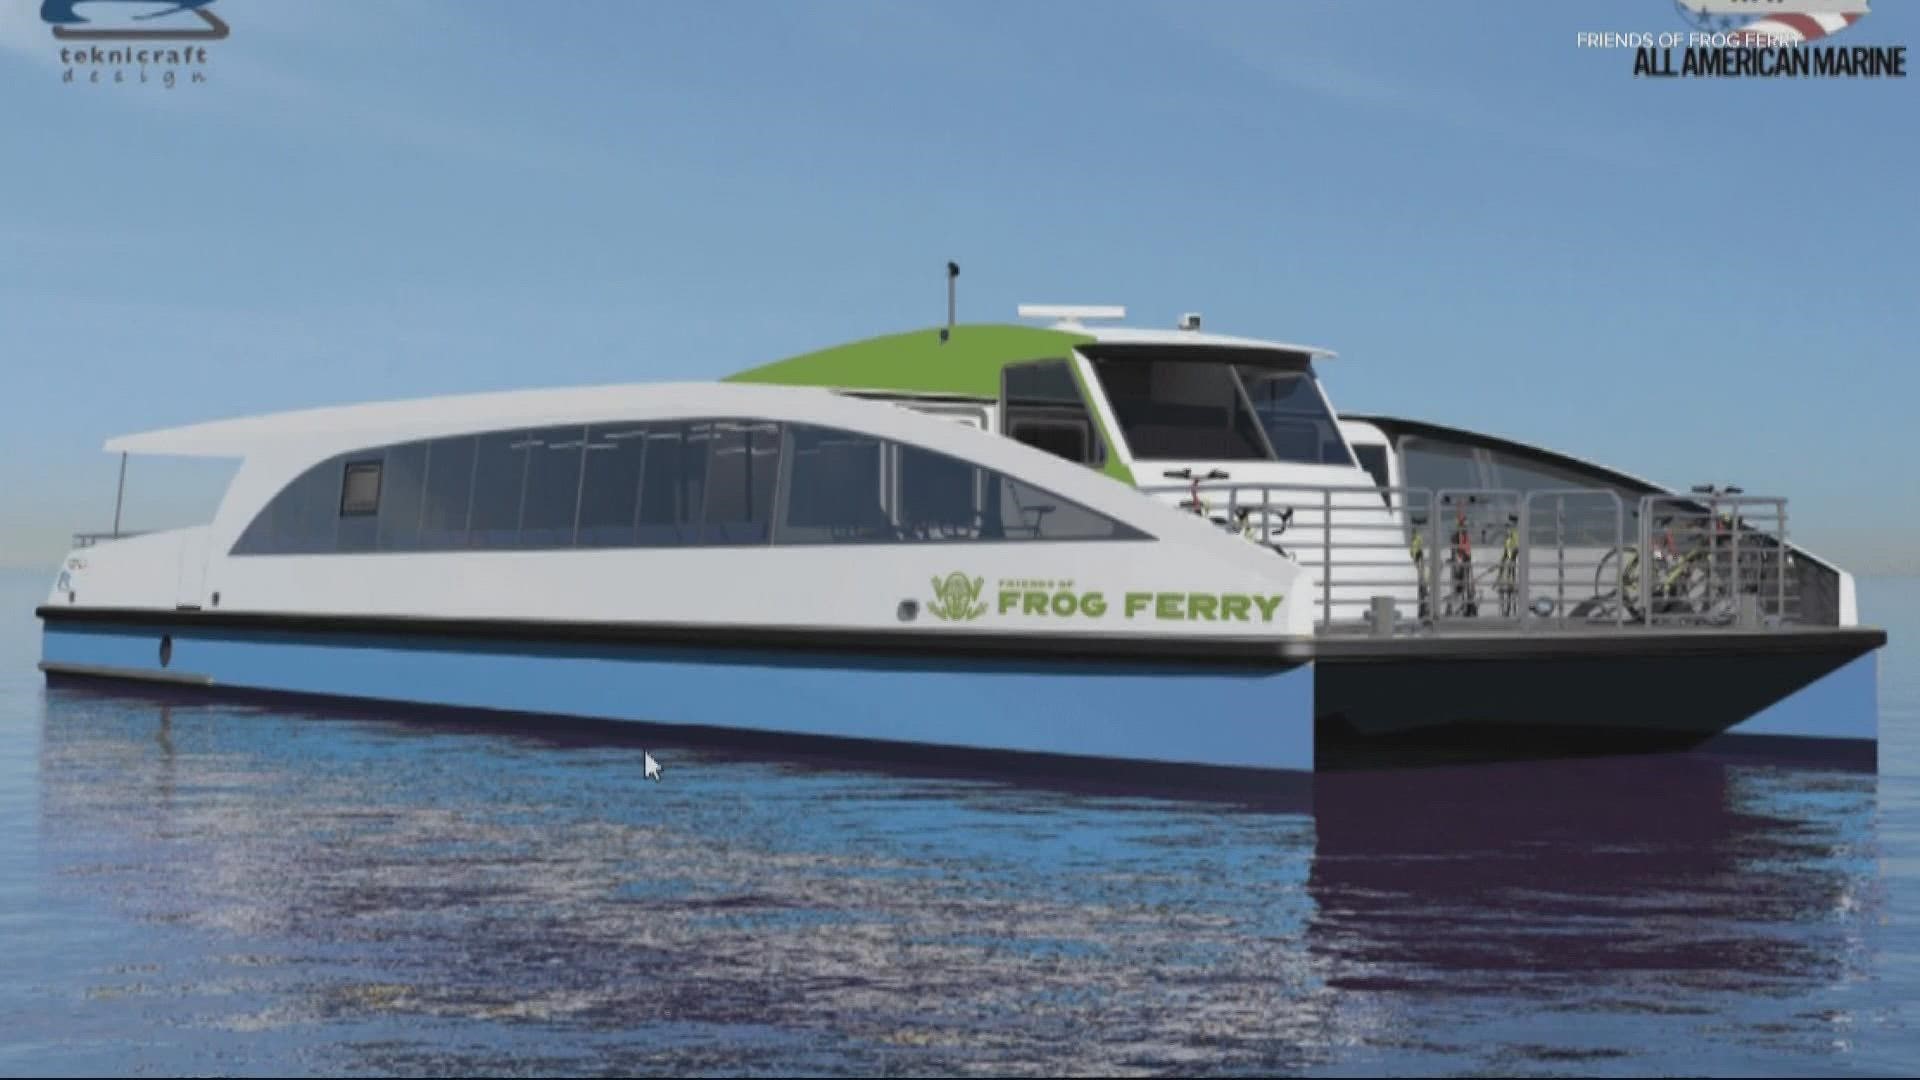 Portland commissioners voted against giving the group funding the ferry system $225,000 amid tensions between the nonprofit and TriMet.